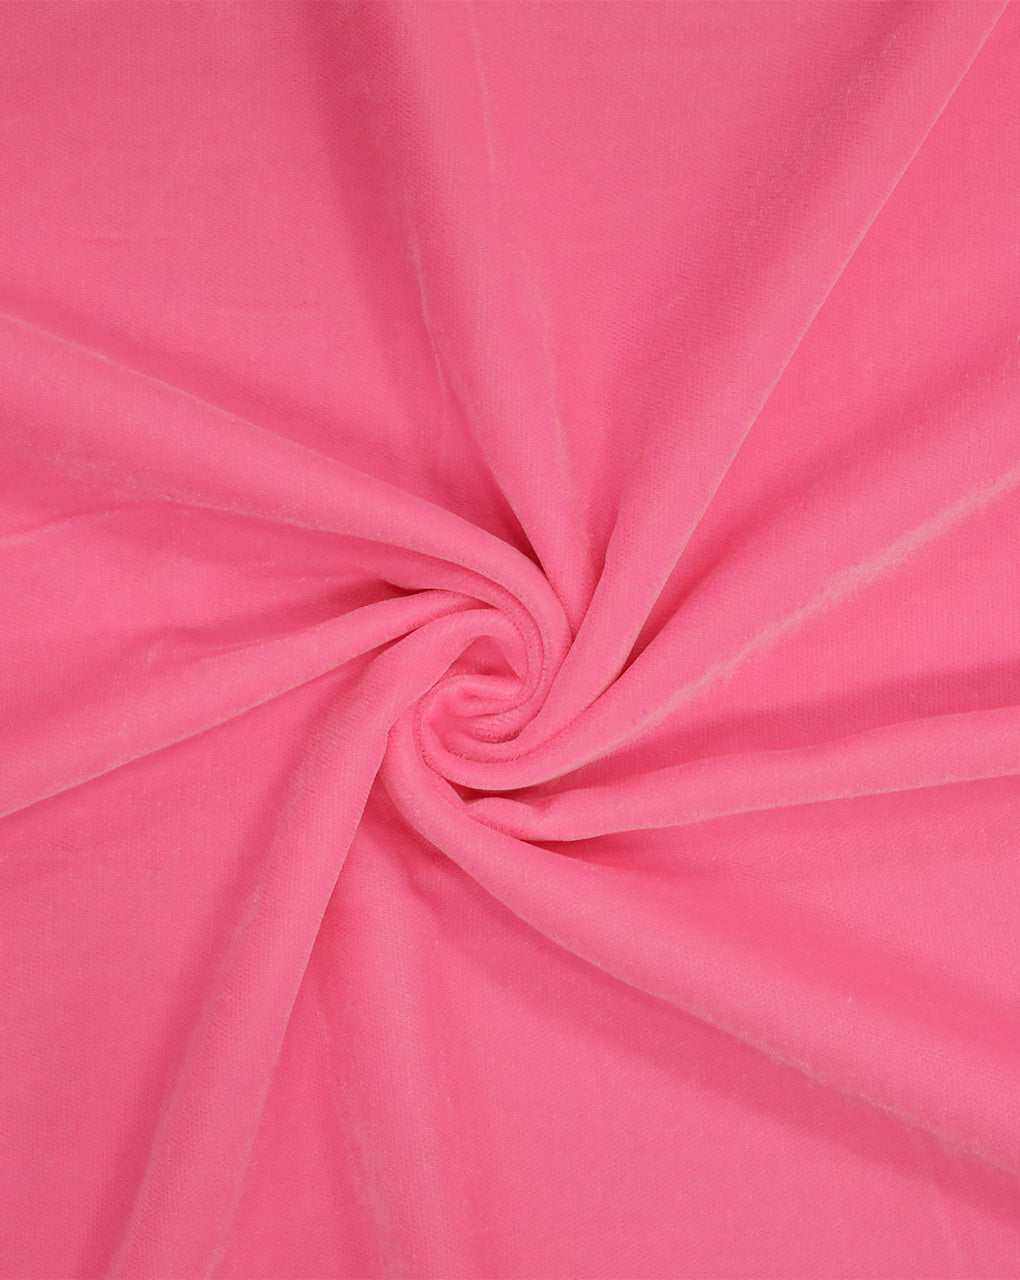 PINK PLAIN POLYESTER MICRO VELVET FABRIC ( WIDTH 58 INCHES )